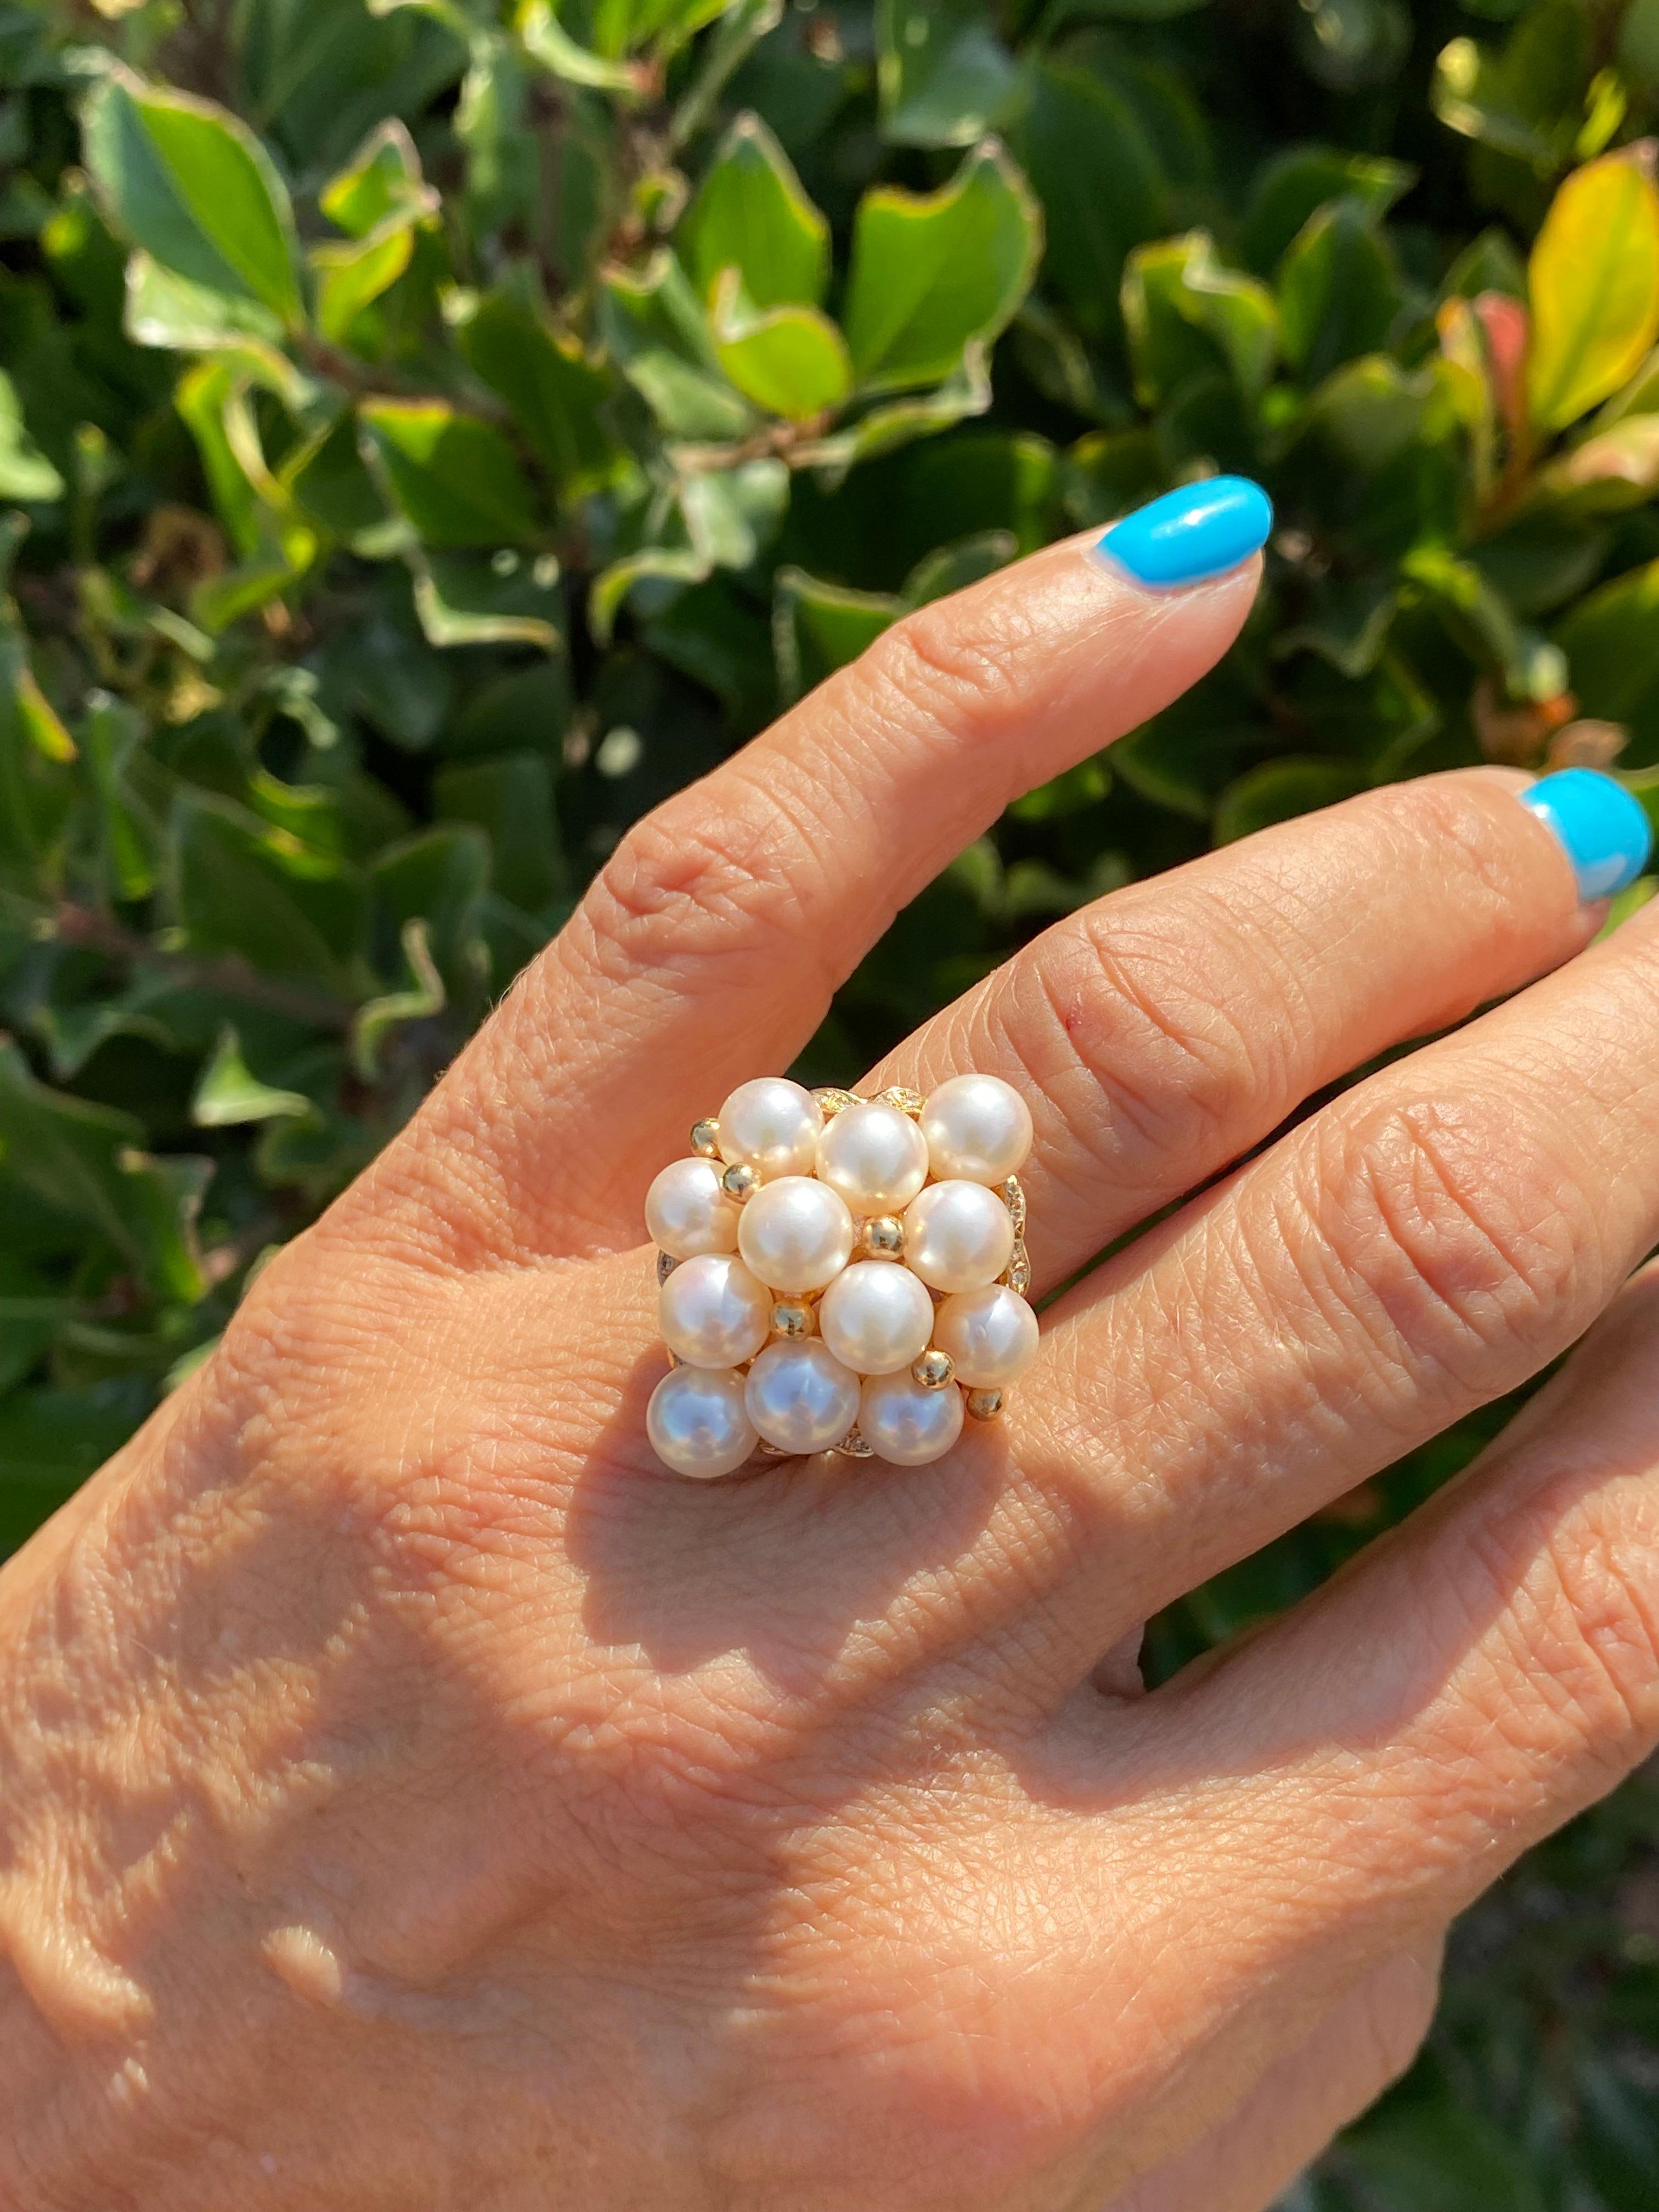 This quality pearl ring is lush with luster illuminating from matching, quality AAA pearls set with diamonds in a 14 karat. yellow gold setting

12 pristine pearls are set in a diamond shape ring with diamond accents at the four corners of the